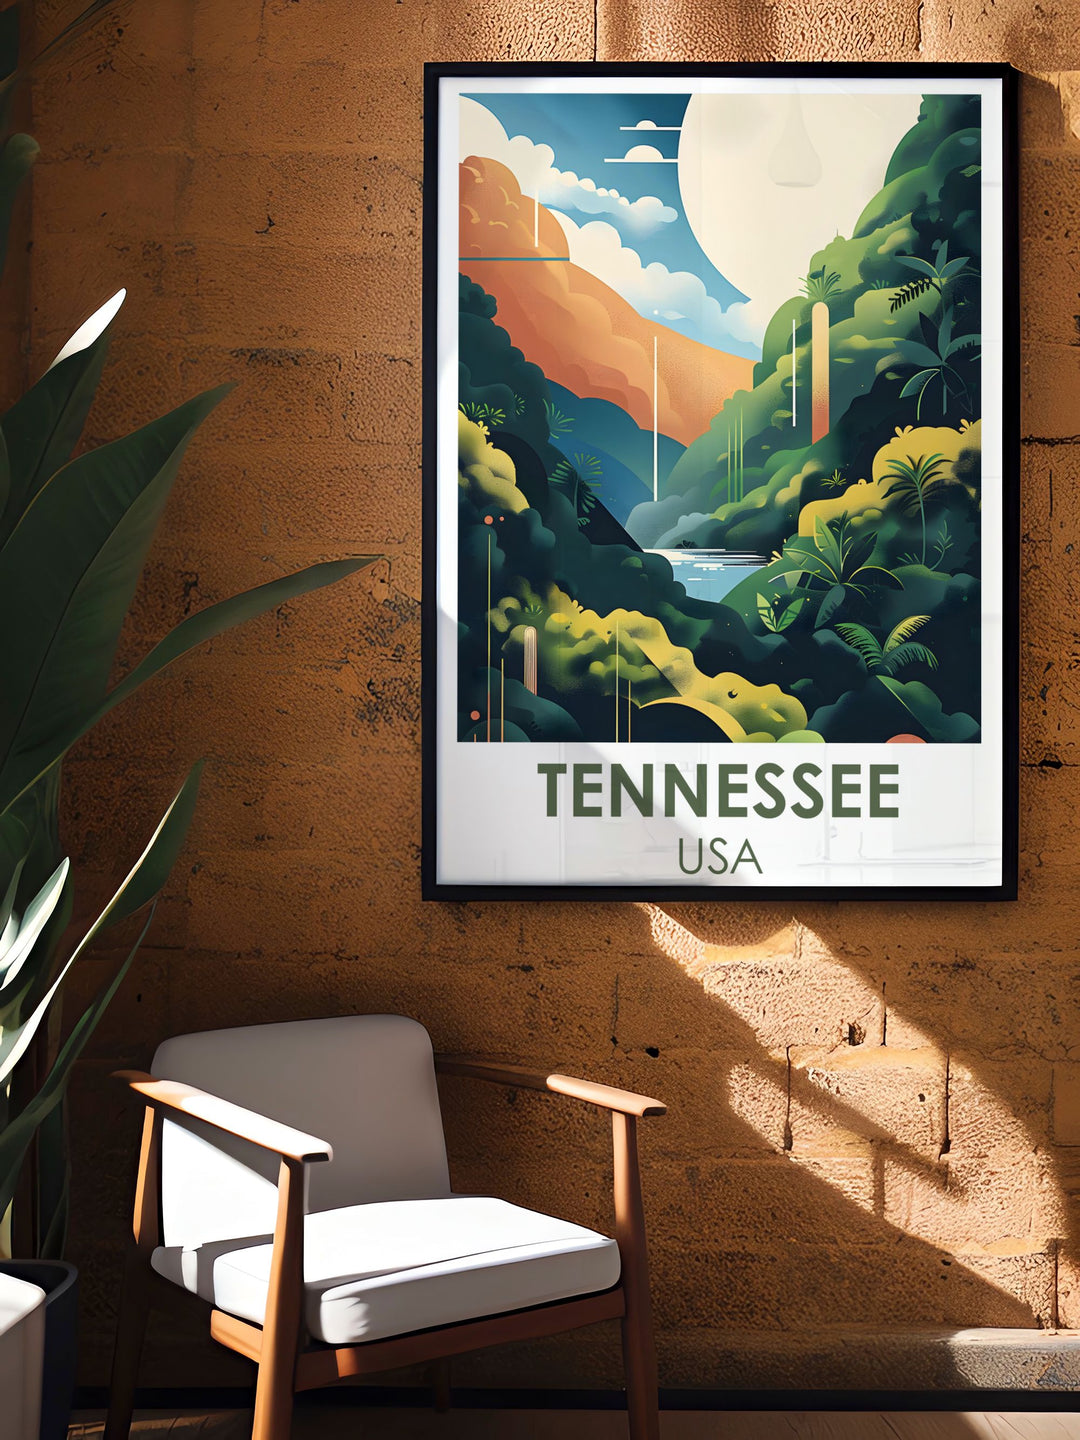 Framed Print of the Ryman Auditorium in Nashville Tennessee with the lush forests and misty peaks of Great Smoky Mountains National Park. This artwork is a perfect gift for country music enthusiasts and nature lovers alike.